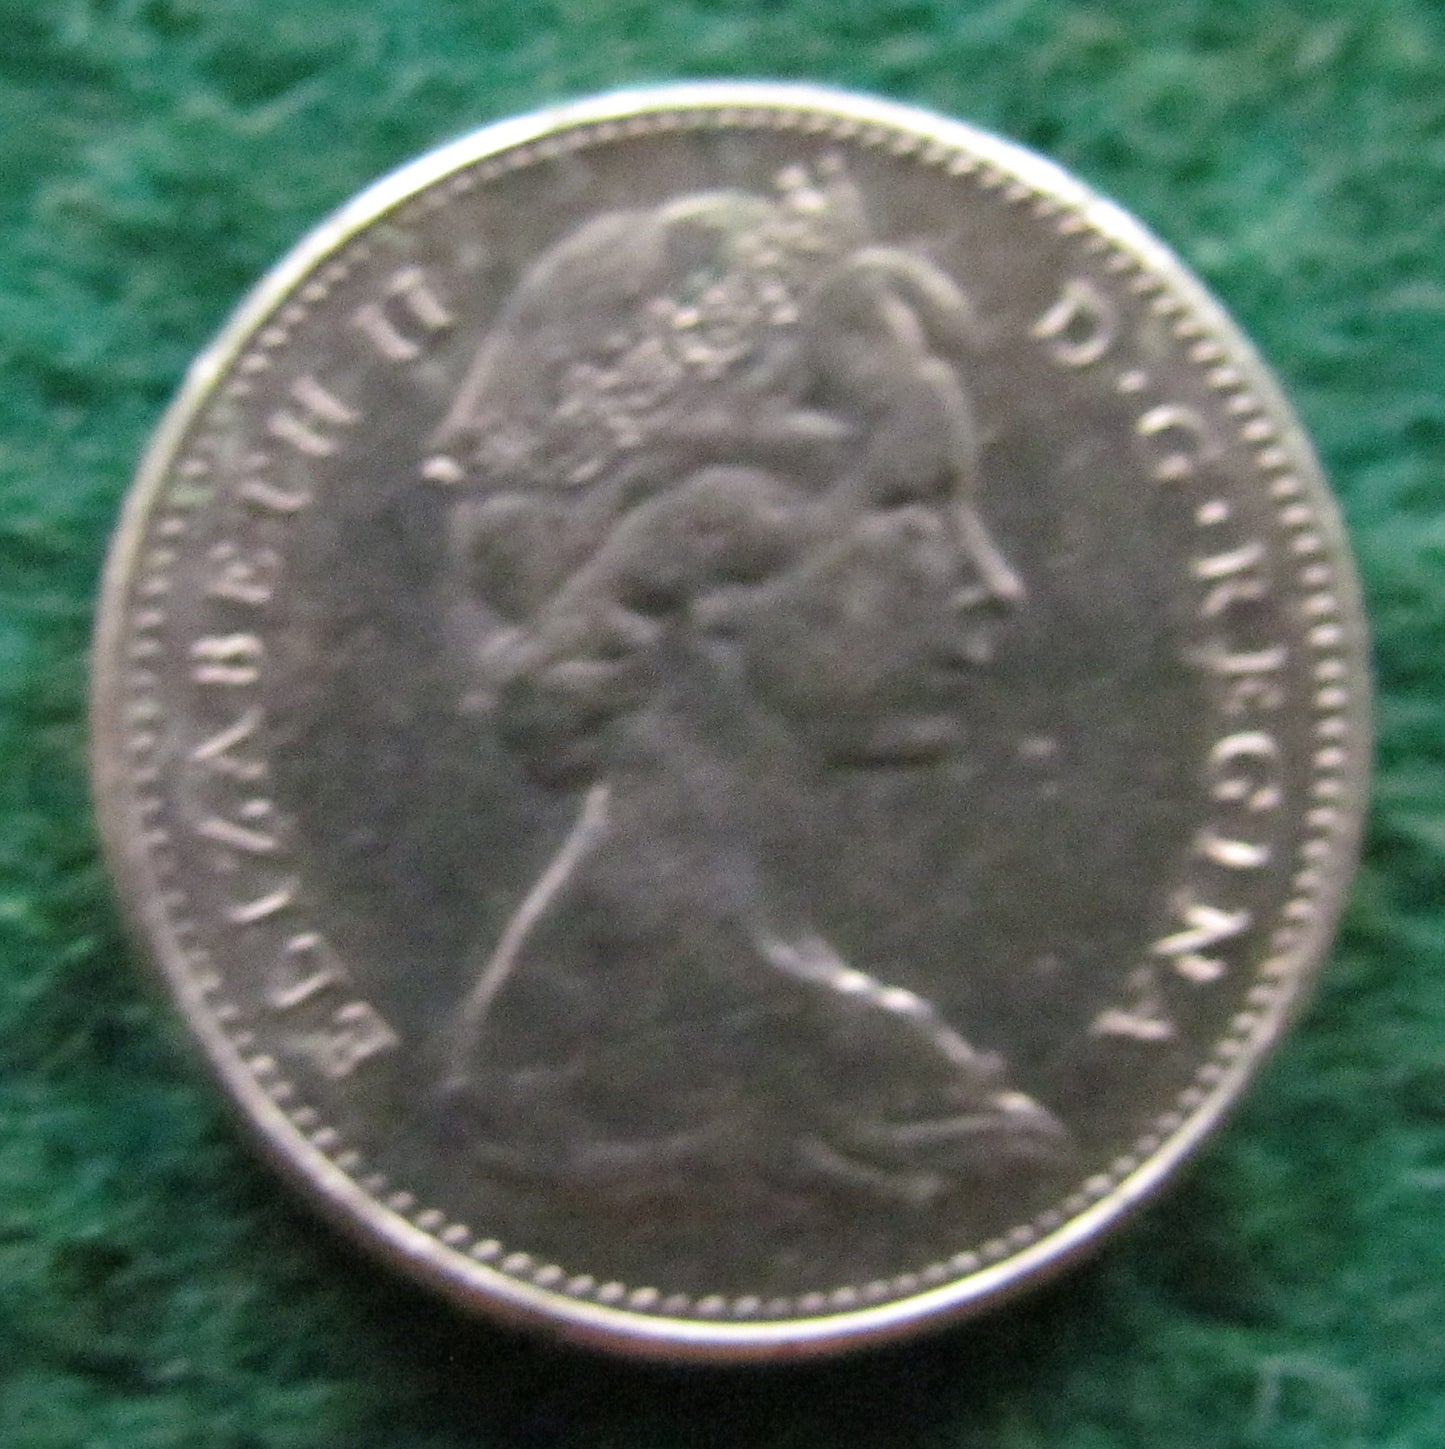 Canada 1978 5 Cent King George V Coin